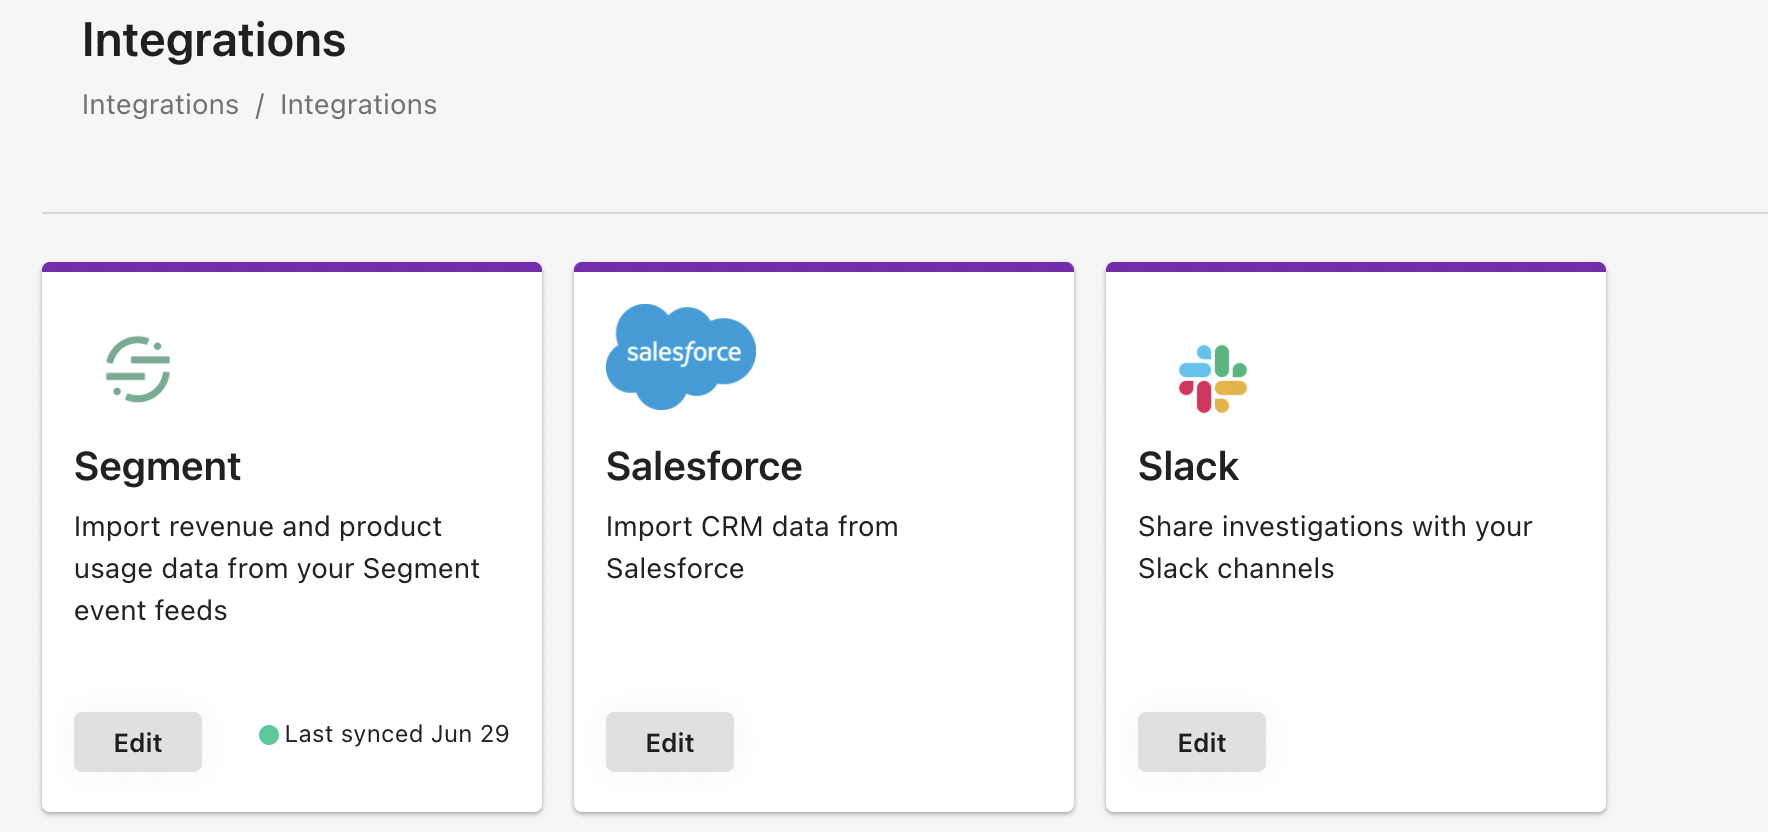 Correlated Integrations Page